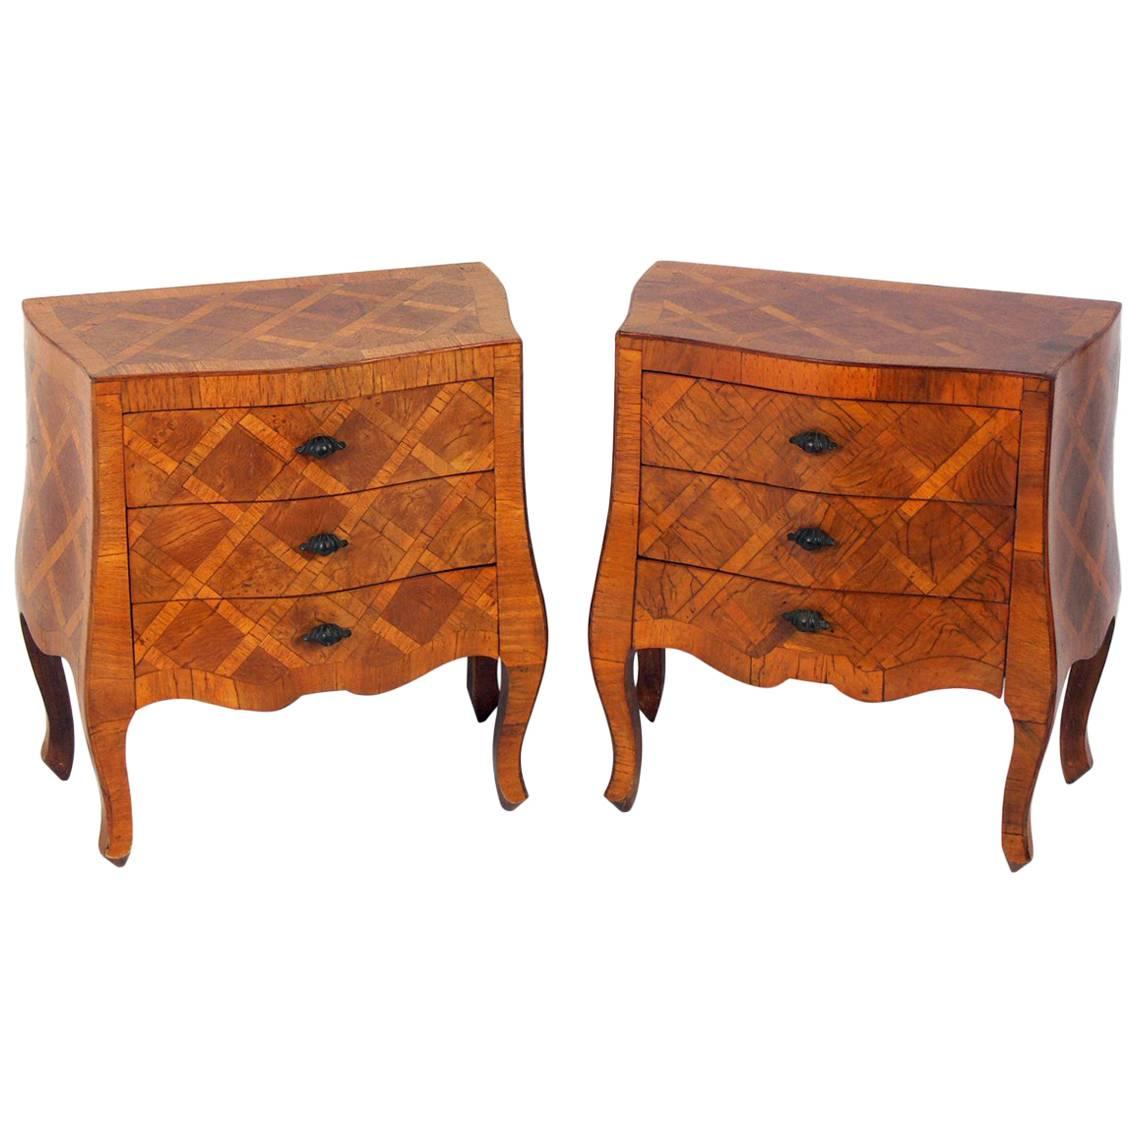 Pair of Curvaceous Italian Nightstands or End Tables